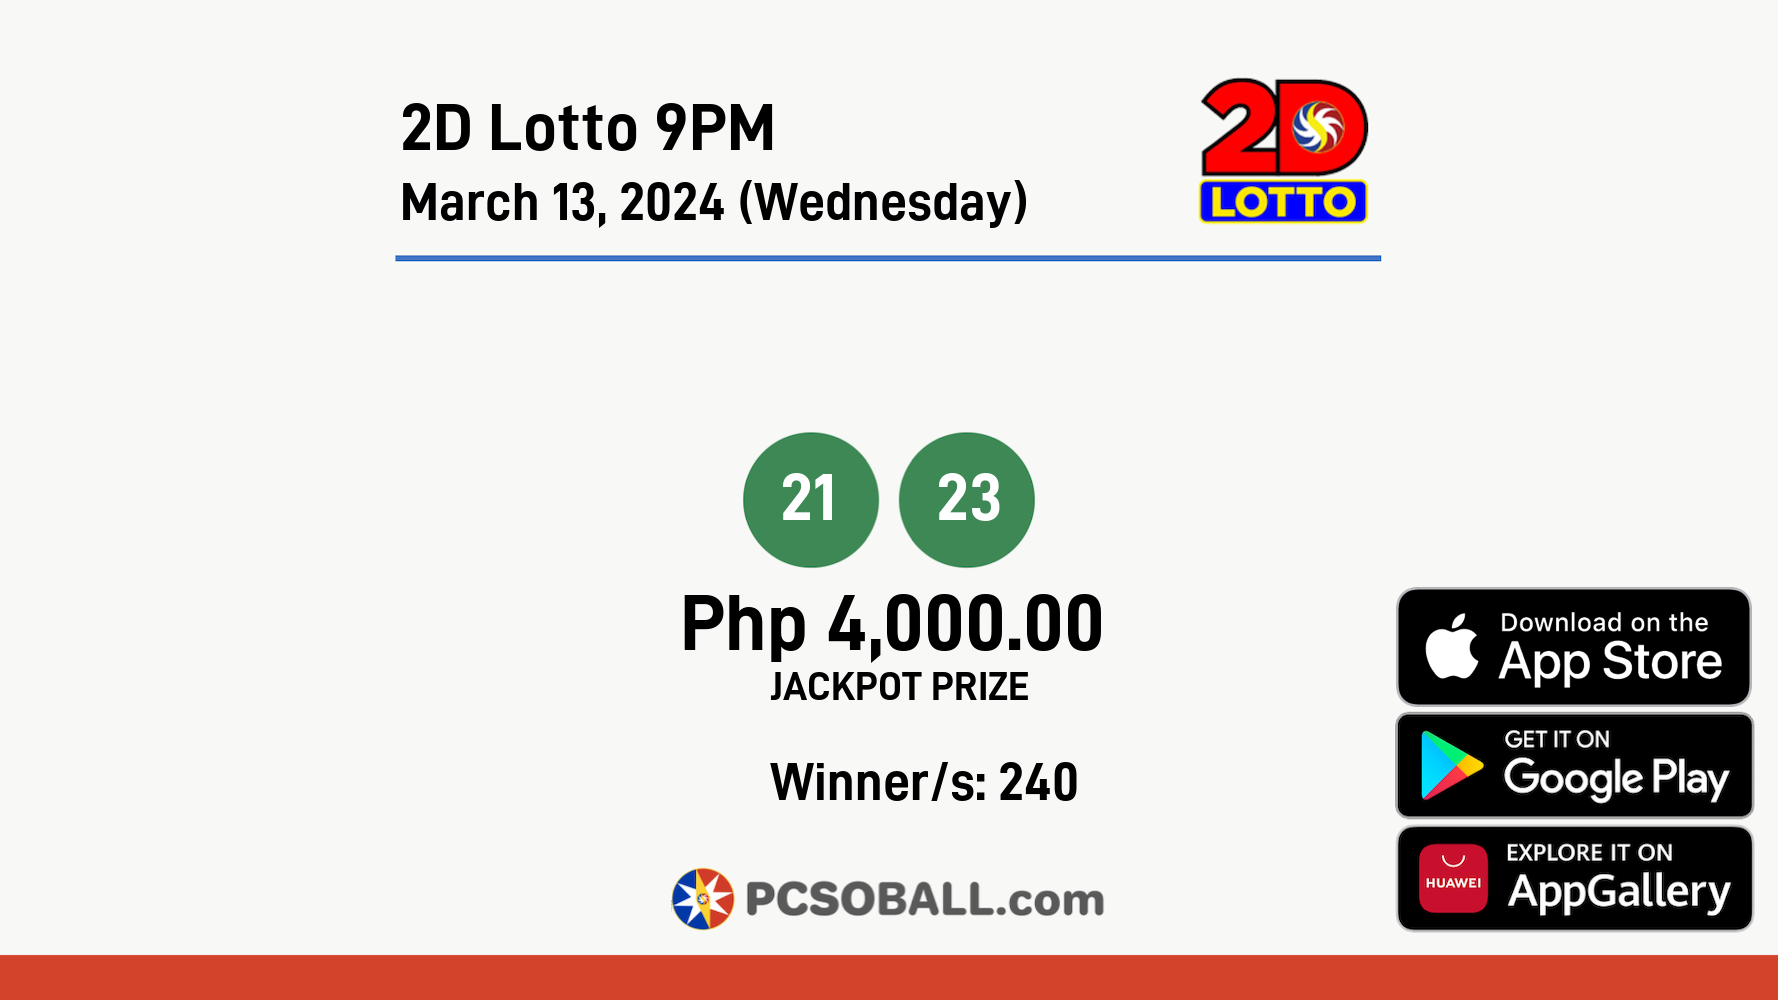 2D Lotto 9PM March 13, 2024 (Wednesday) Result